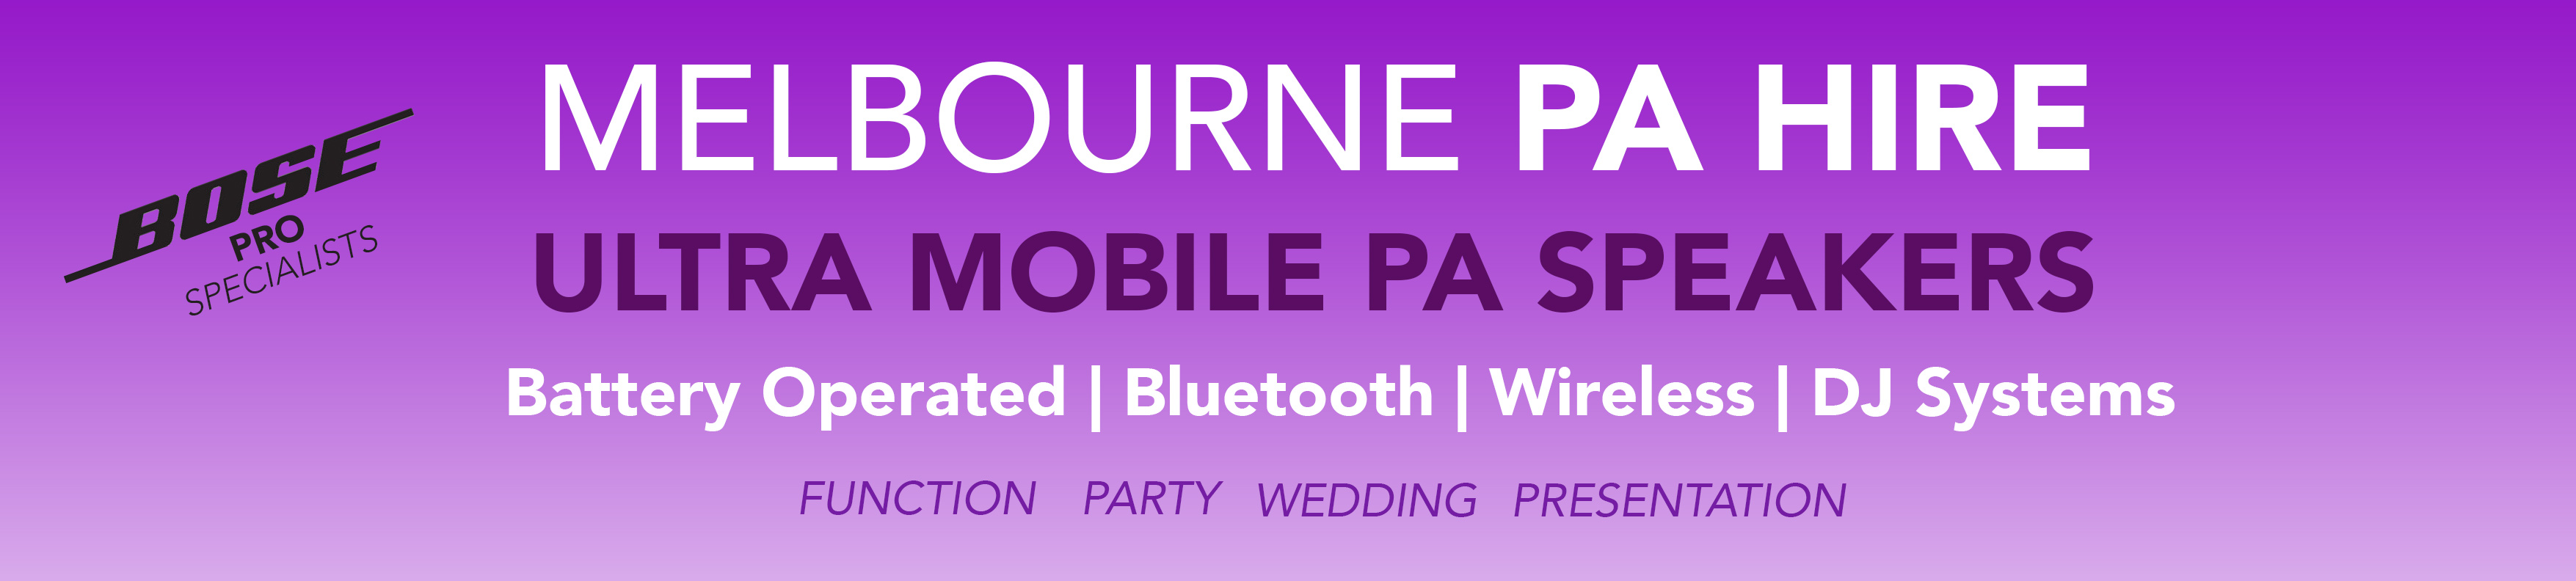 Powered speakers, ultra-mobile PA systems for parties, weddings, presentations, functions. Battery powered, bluetooth, wireless microphones available. BOSE, JBL, Samson systems. Call for custom options.